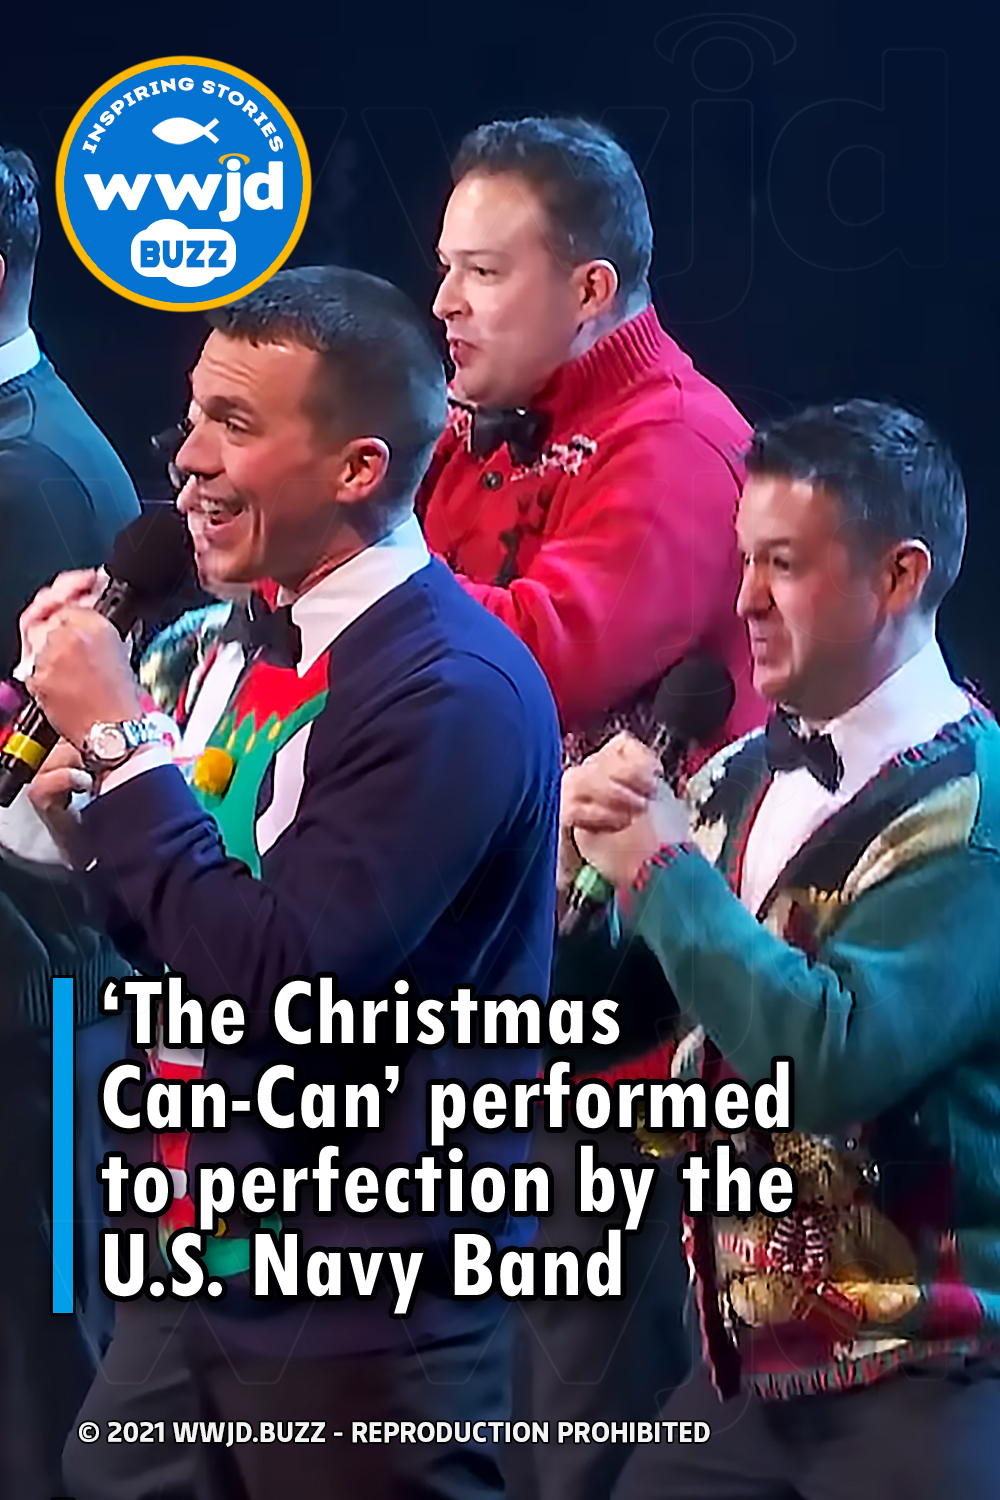 ‘The Christmas Can-Can’ performed to perfection by the U.S. Navy Band